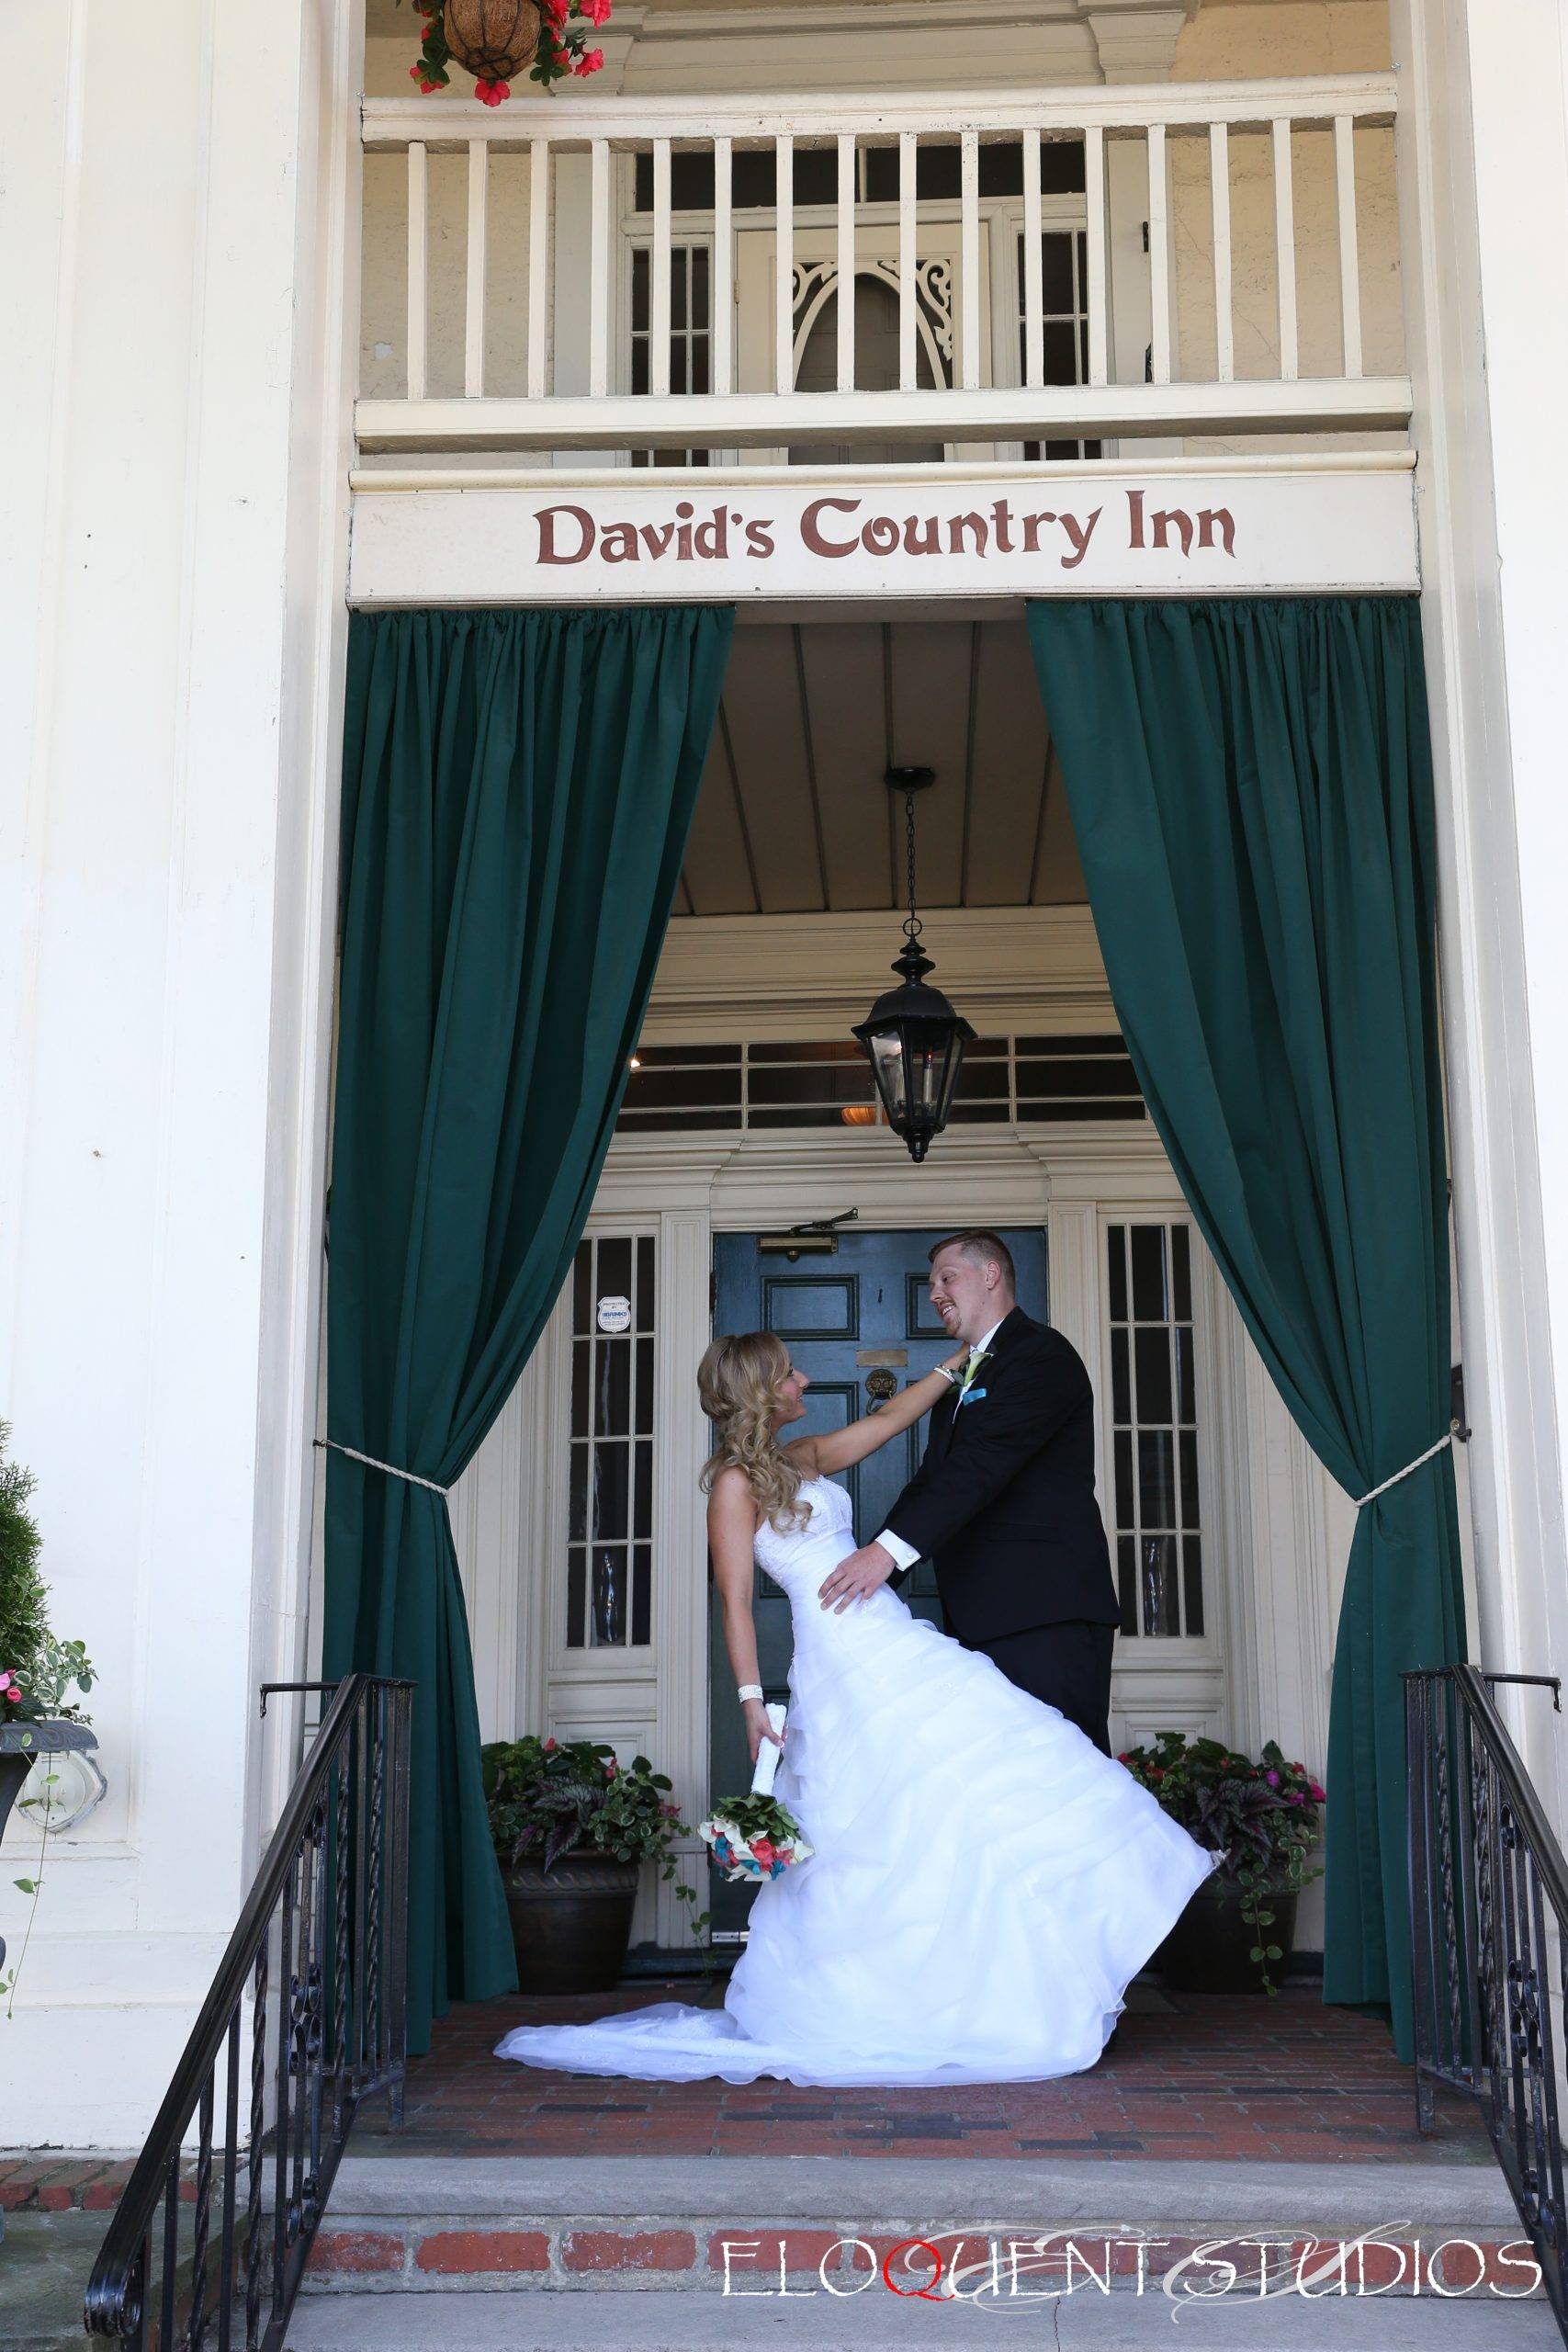 David’s Country Inn bride and groom at front door